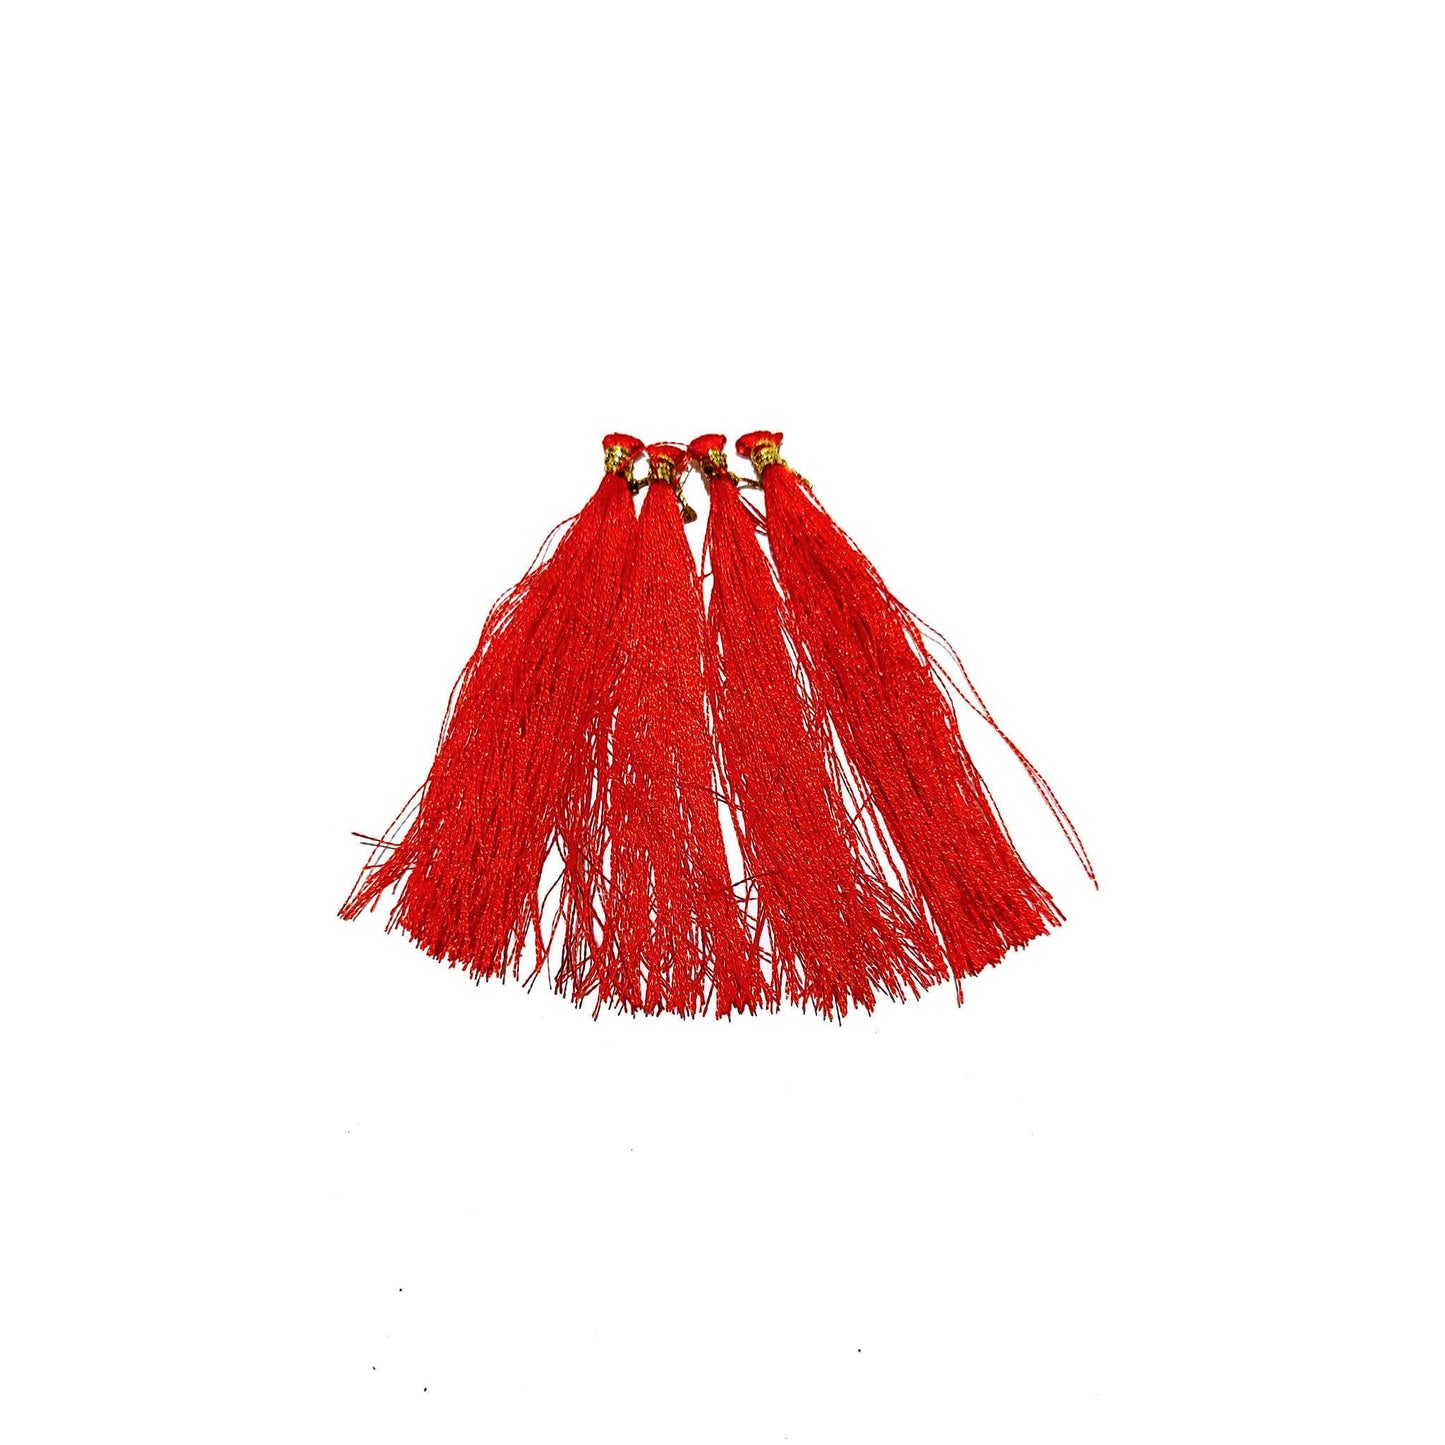 Indian Petals Handmade Long Thread Fringe Tassel for Craft, Jewelry or Dressing - Design 860, Red